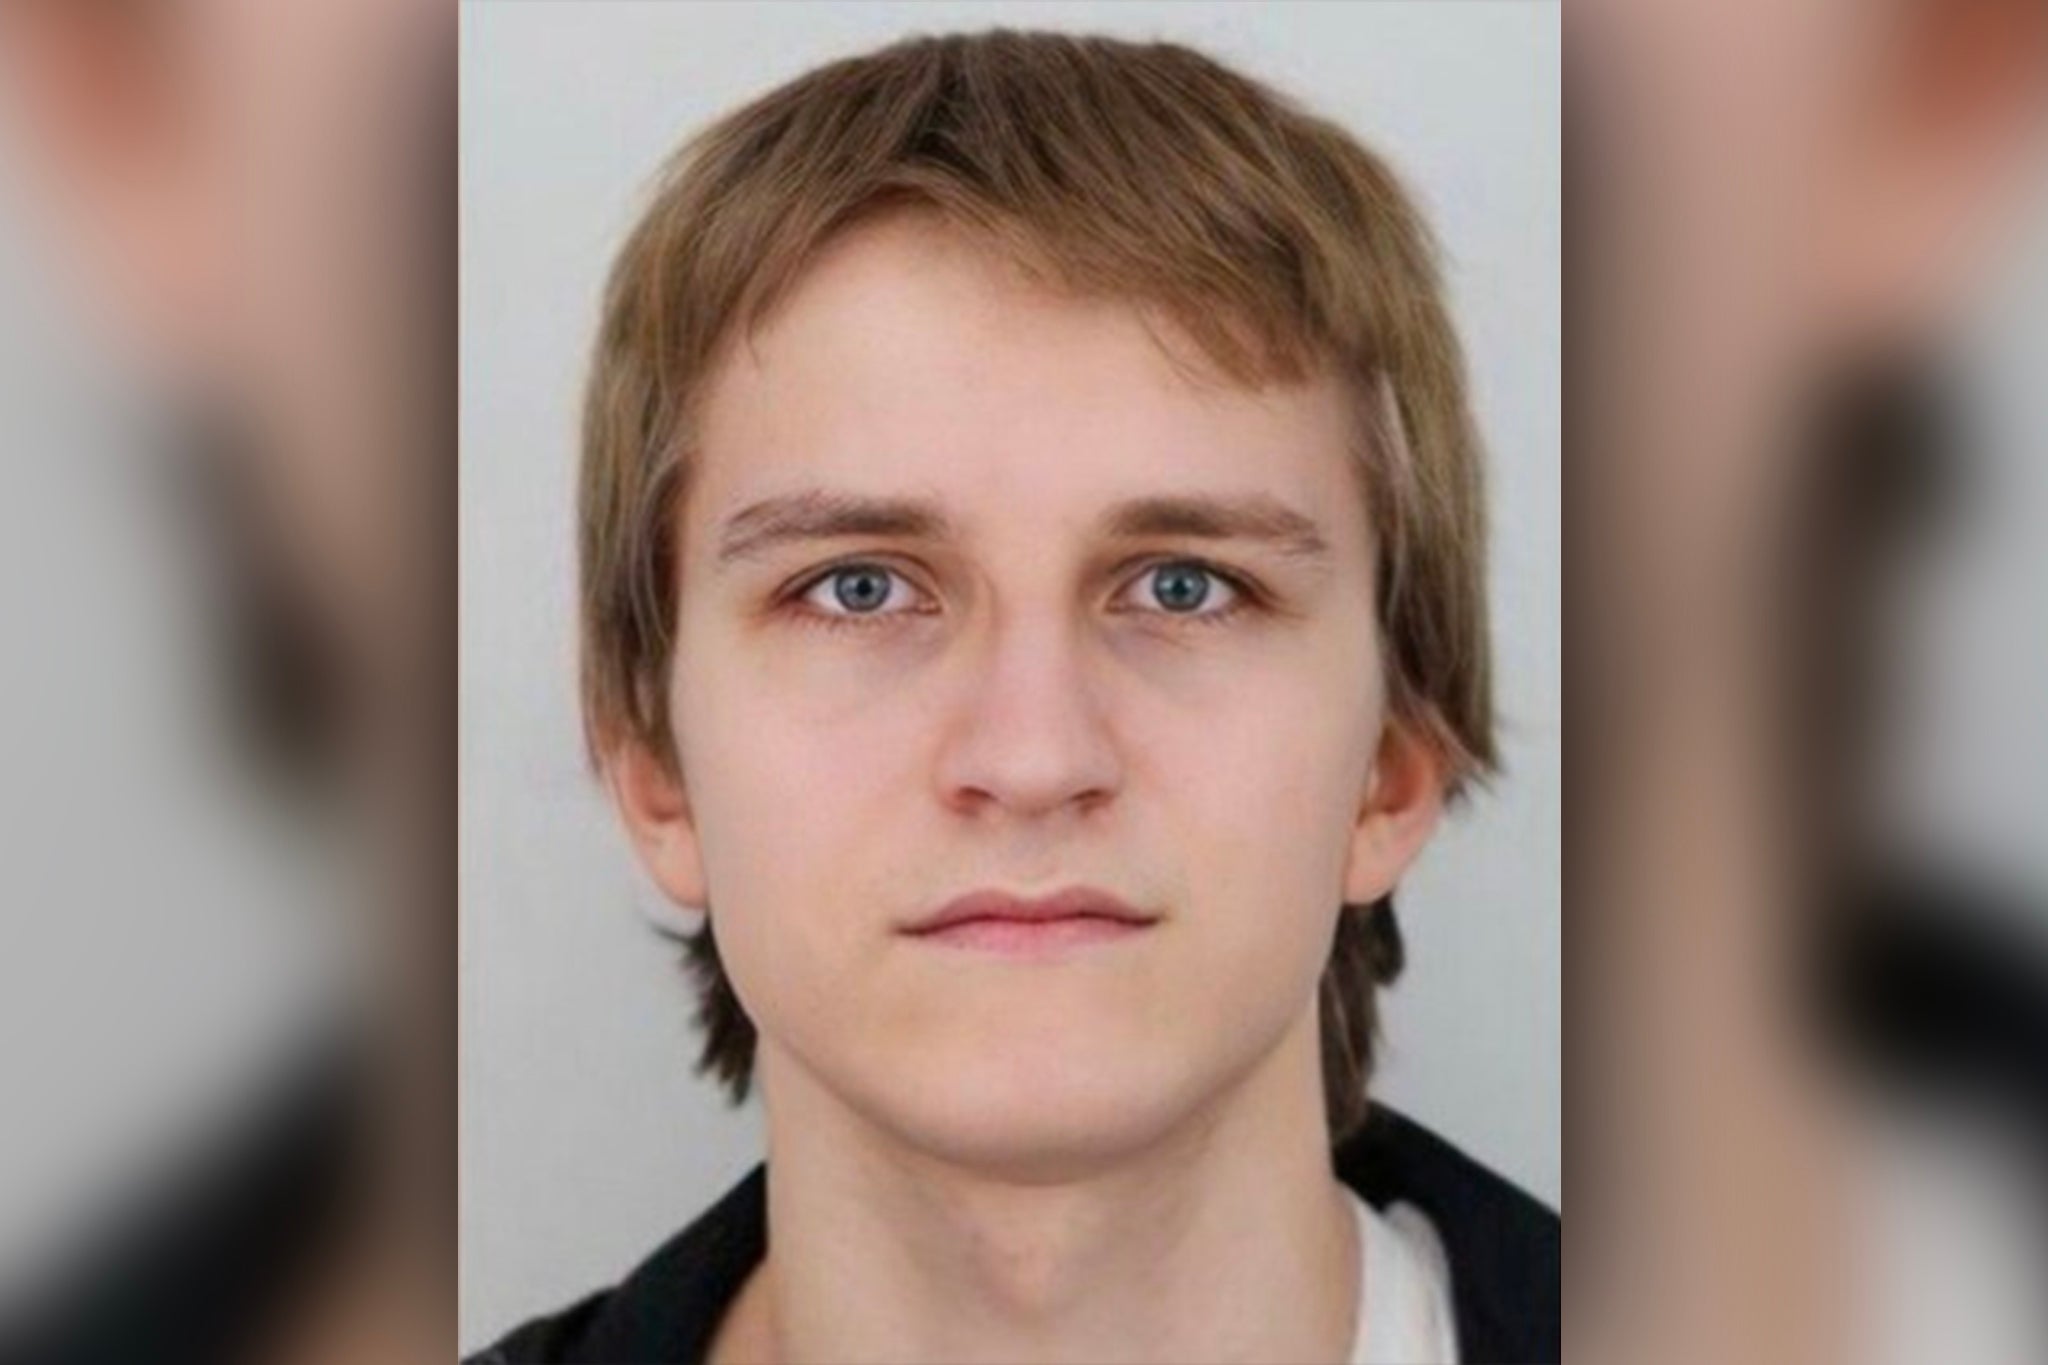 David Kozak killed himself after he was cornered by police on the balcony of the Charles University building